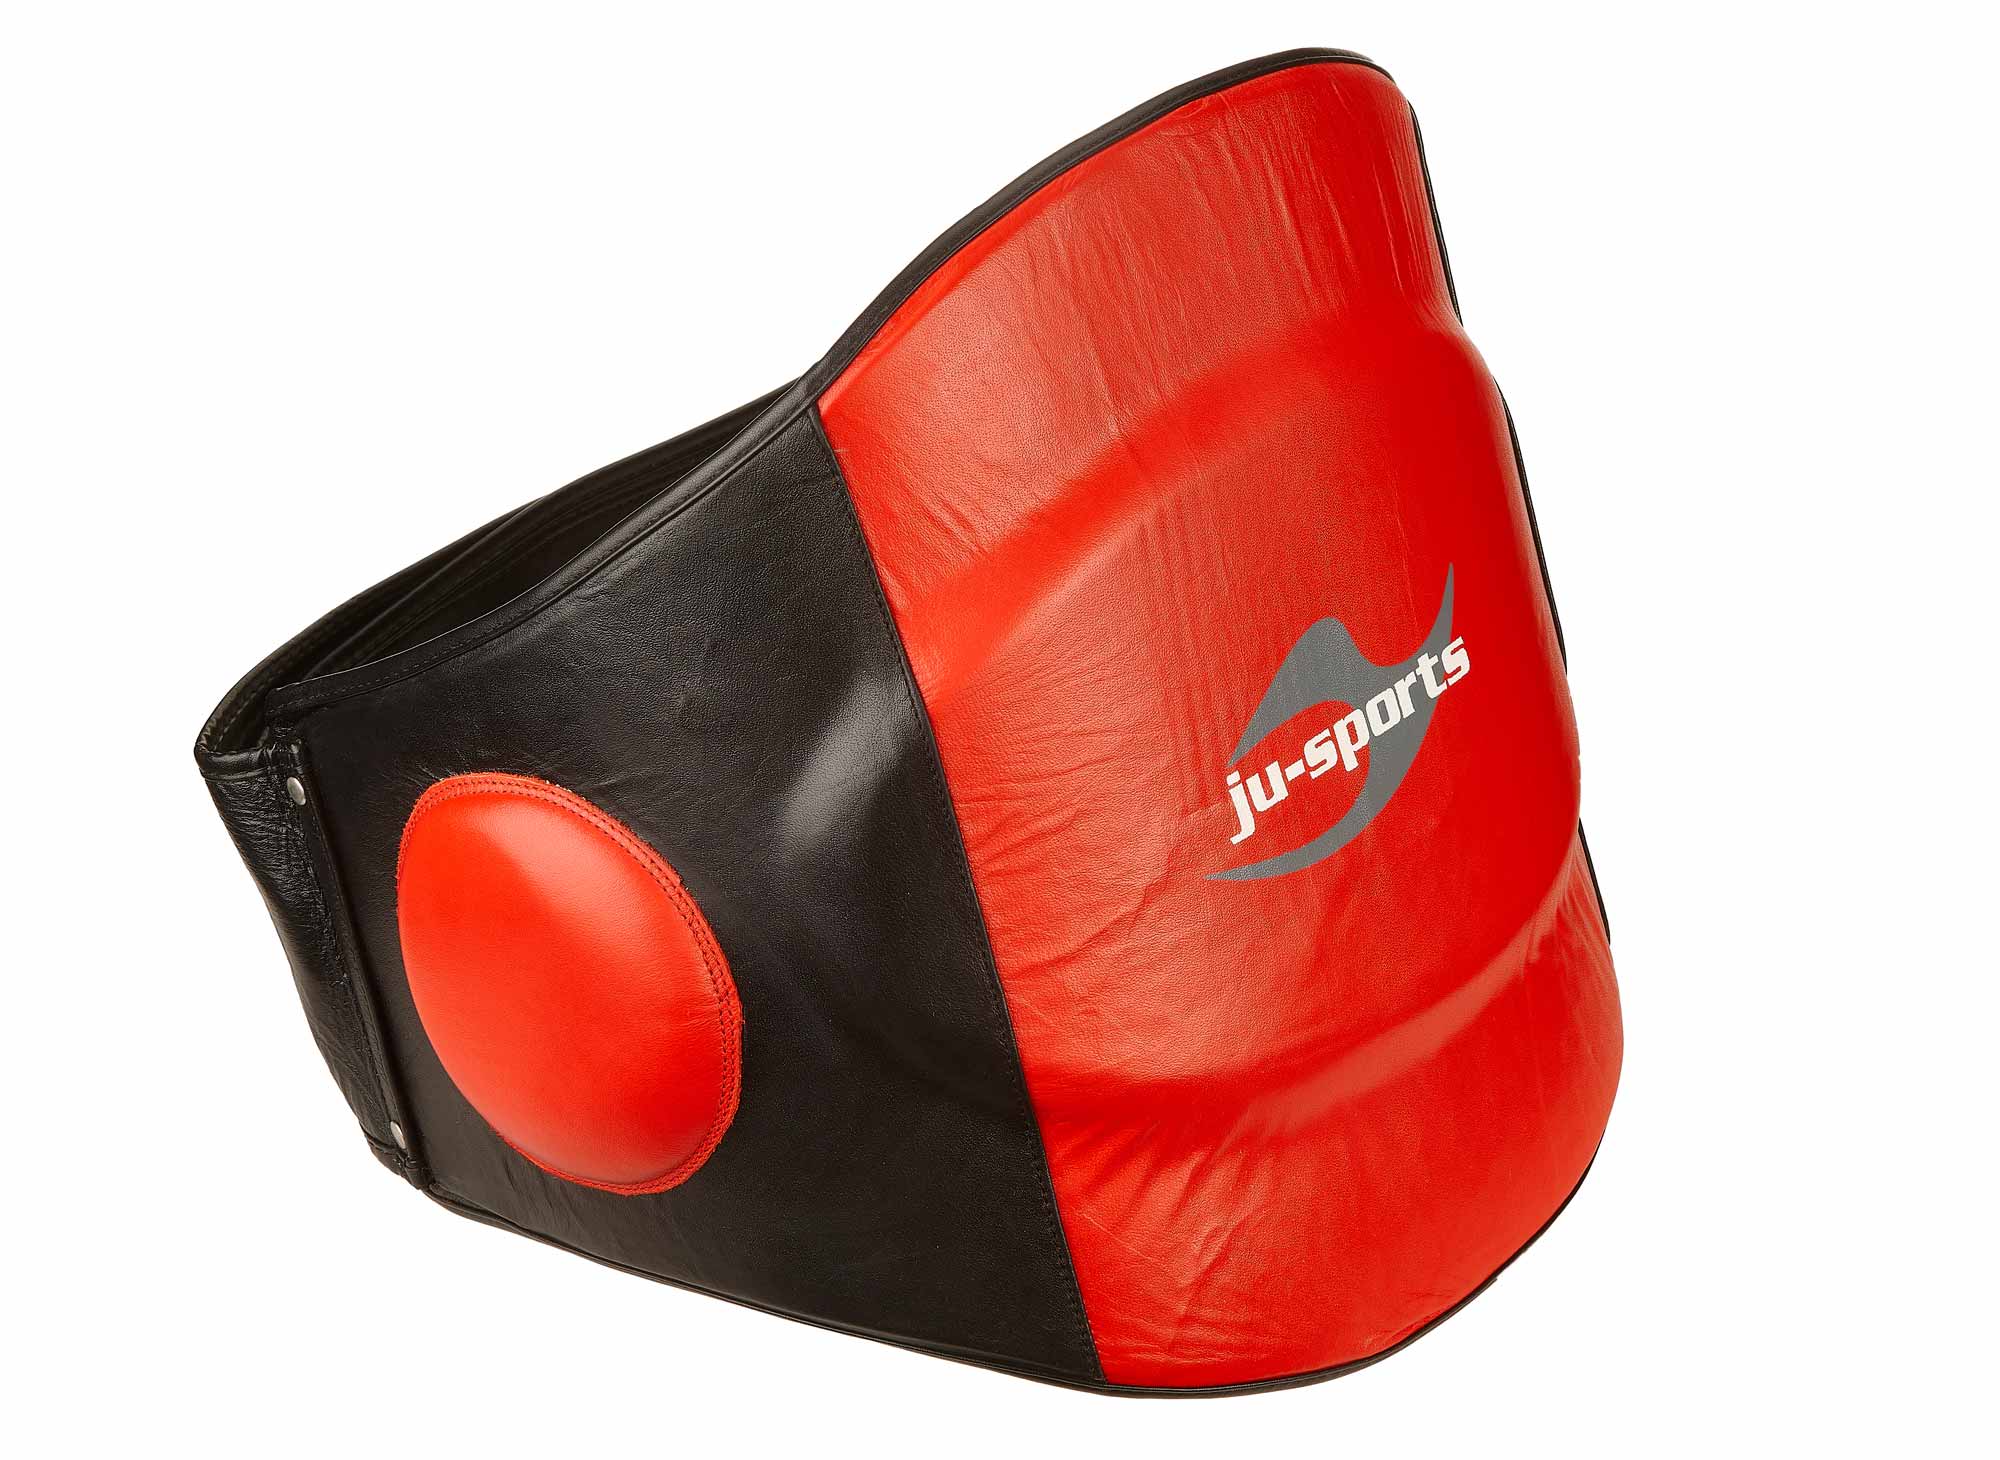 Ju-Sports Body Protector leather